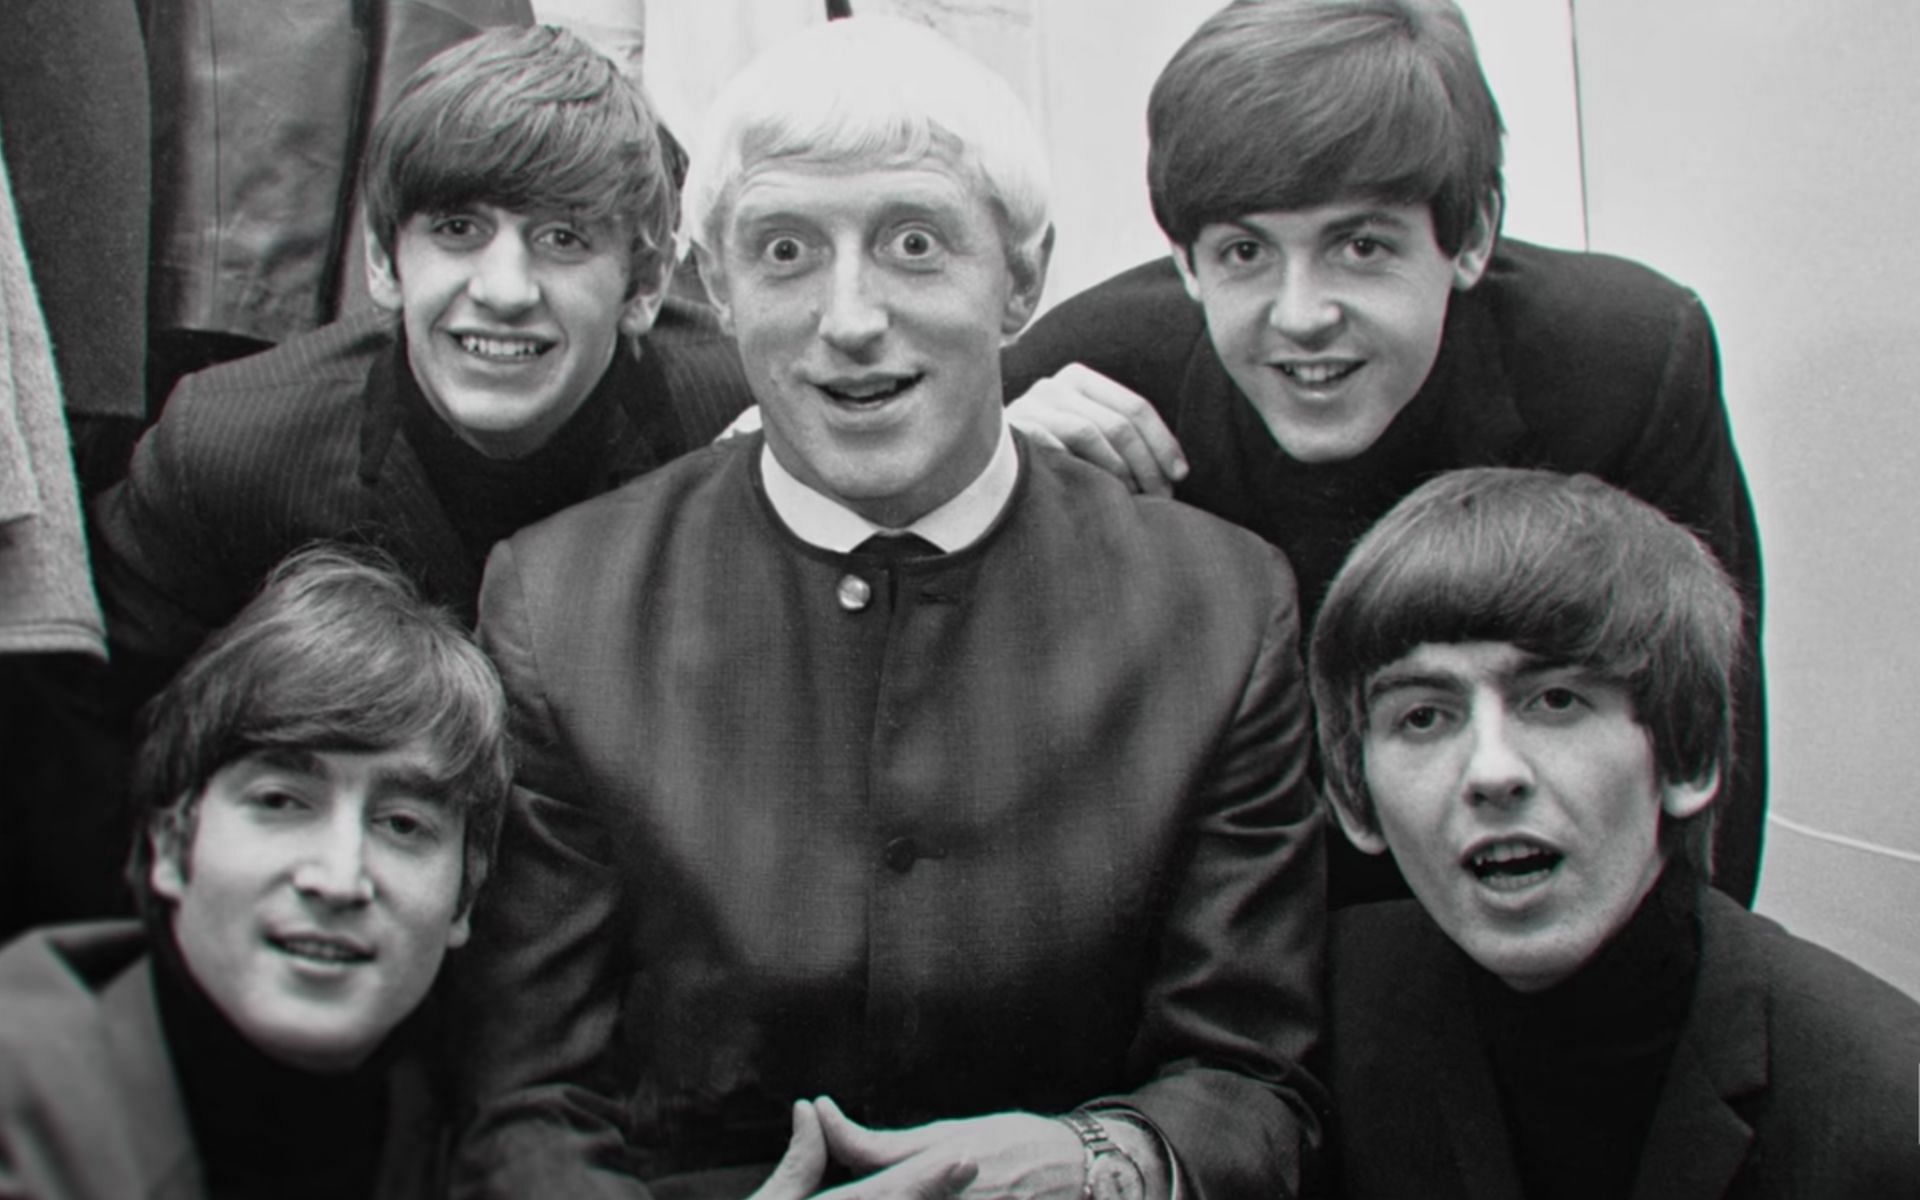 Savile pictured with The Beatles (Image via Netflix/YouTube)